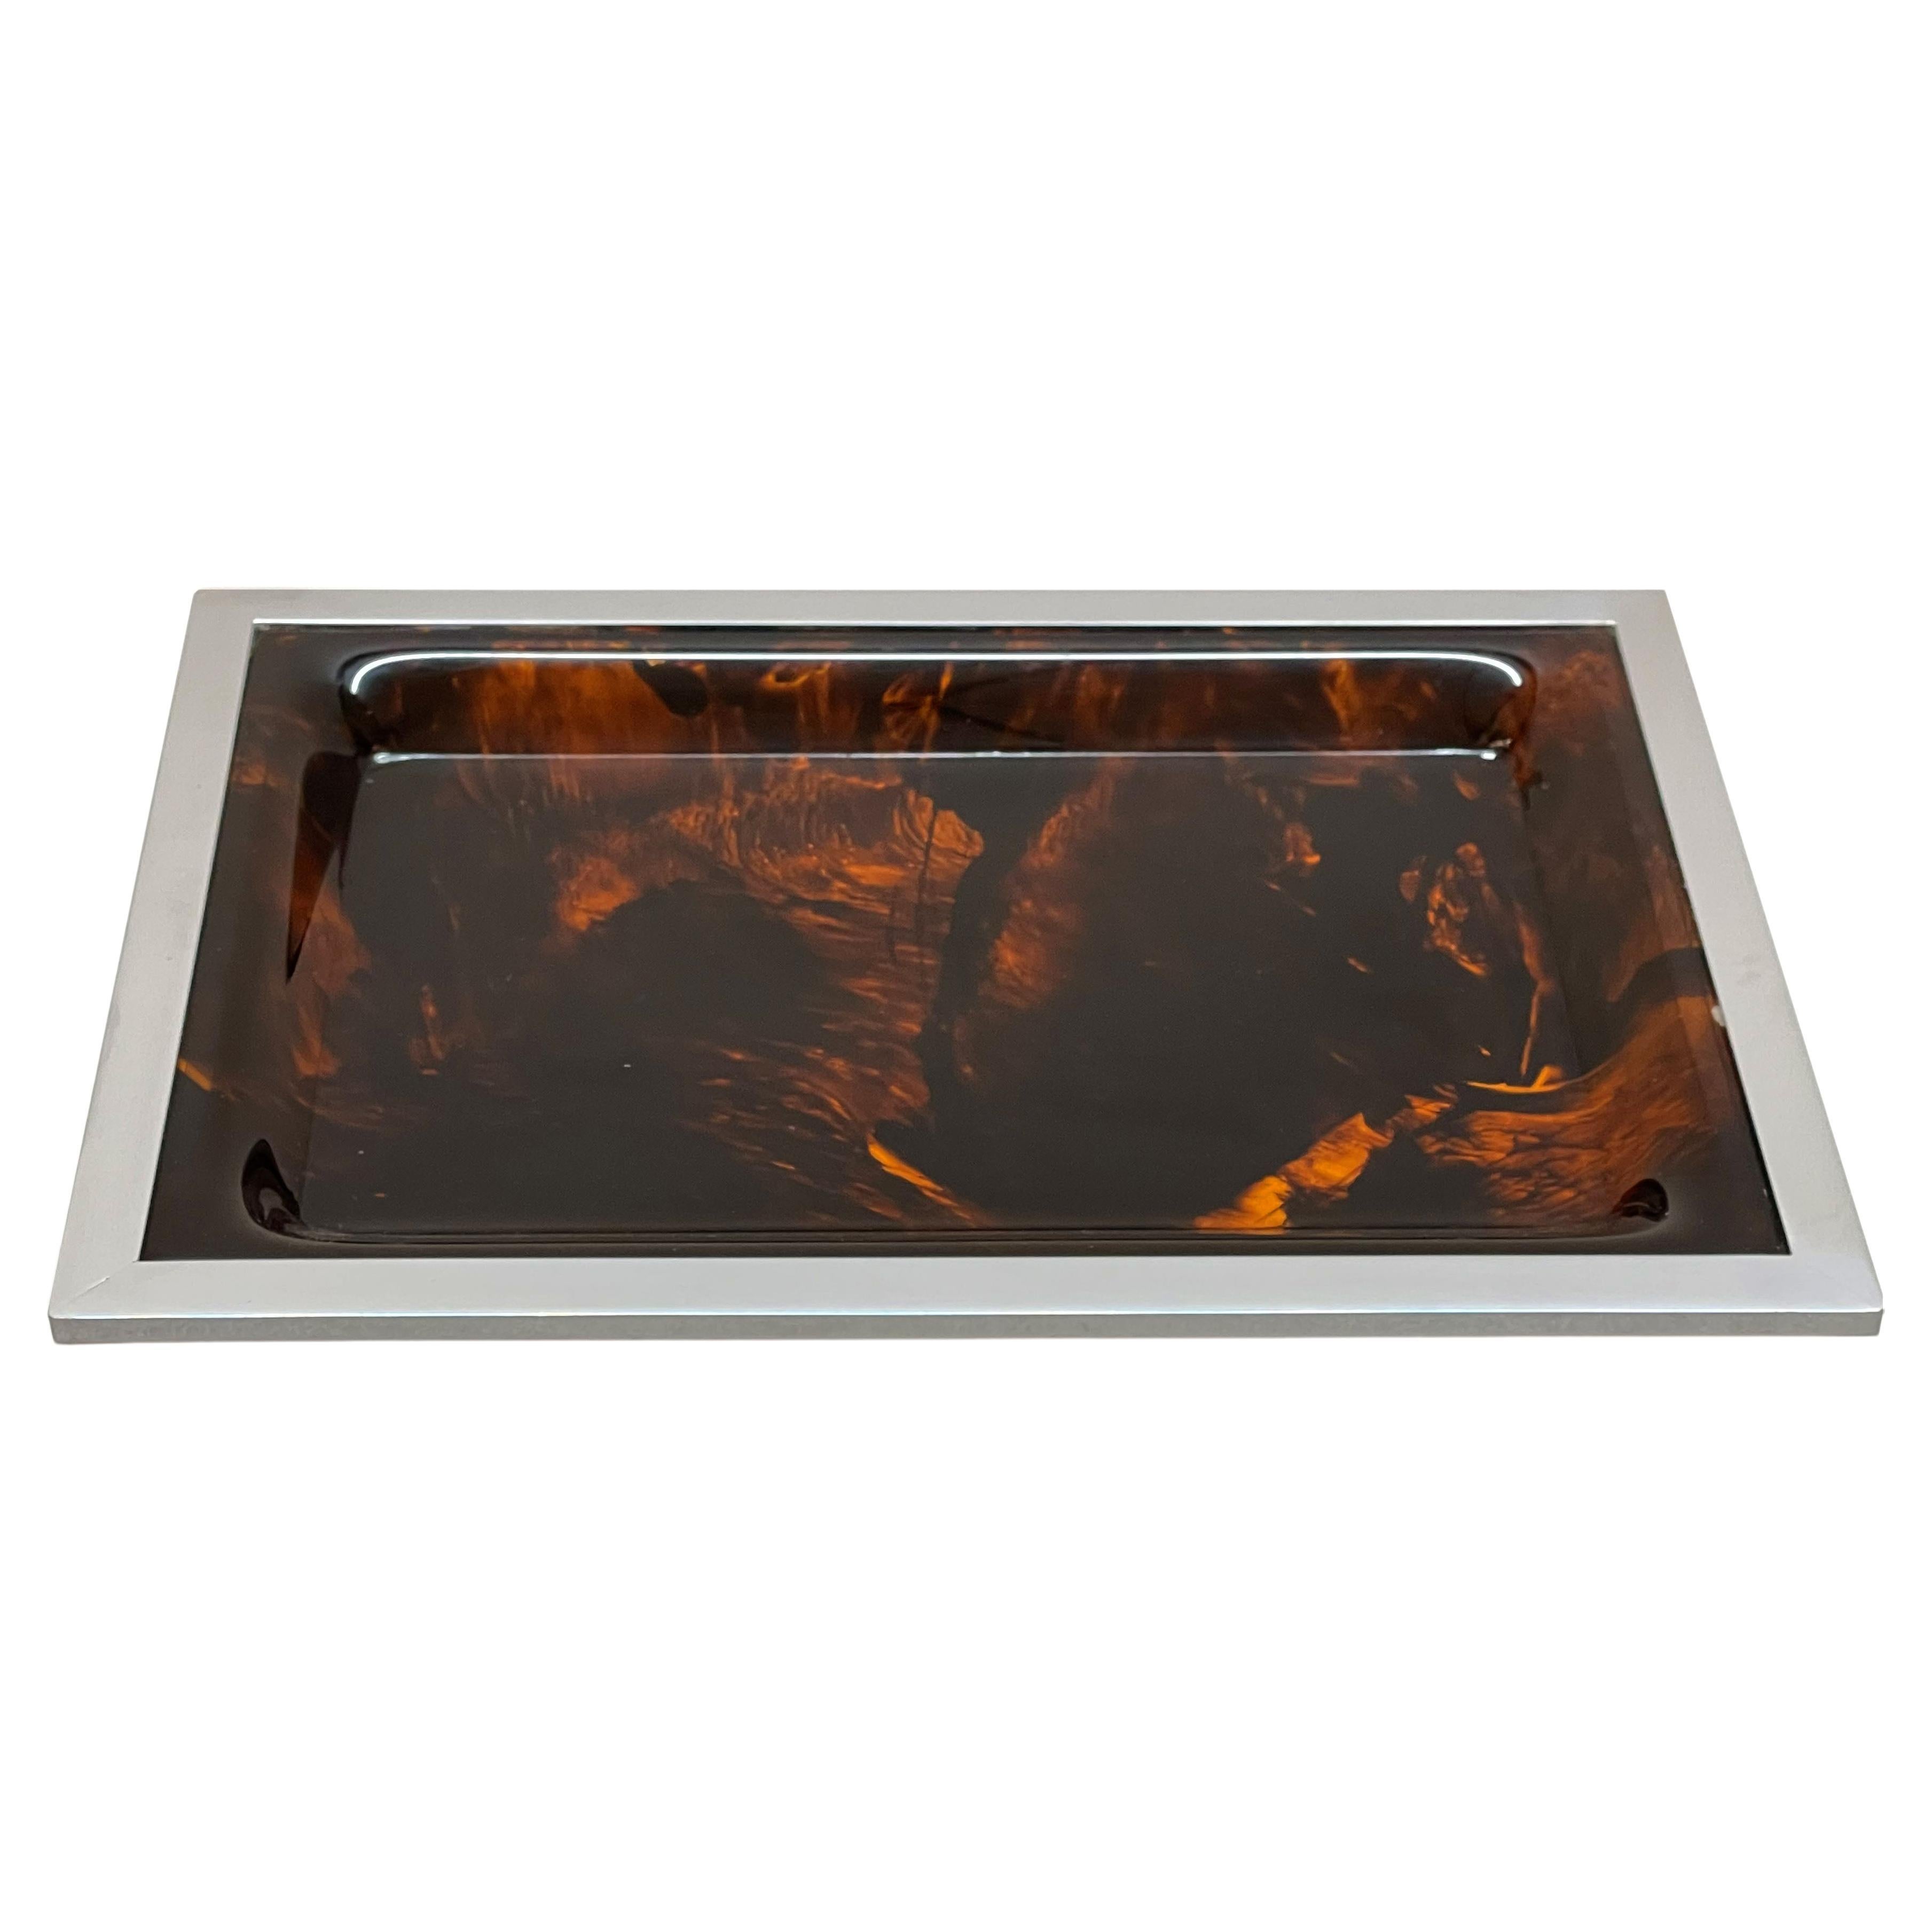 Christian Dior Midcentury Tortoiseshell and Lucite Italian Serving Tray, 1970s